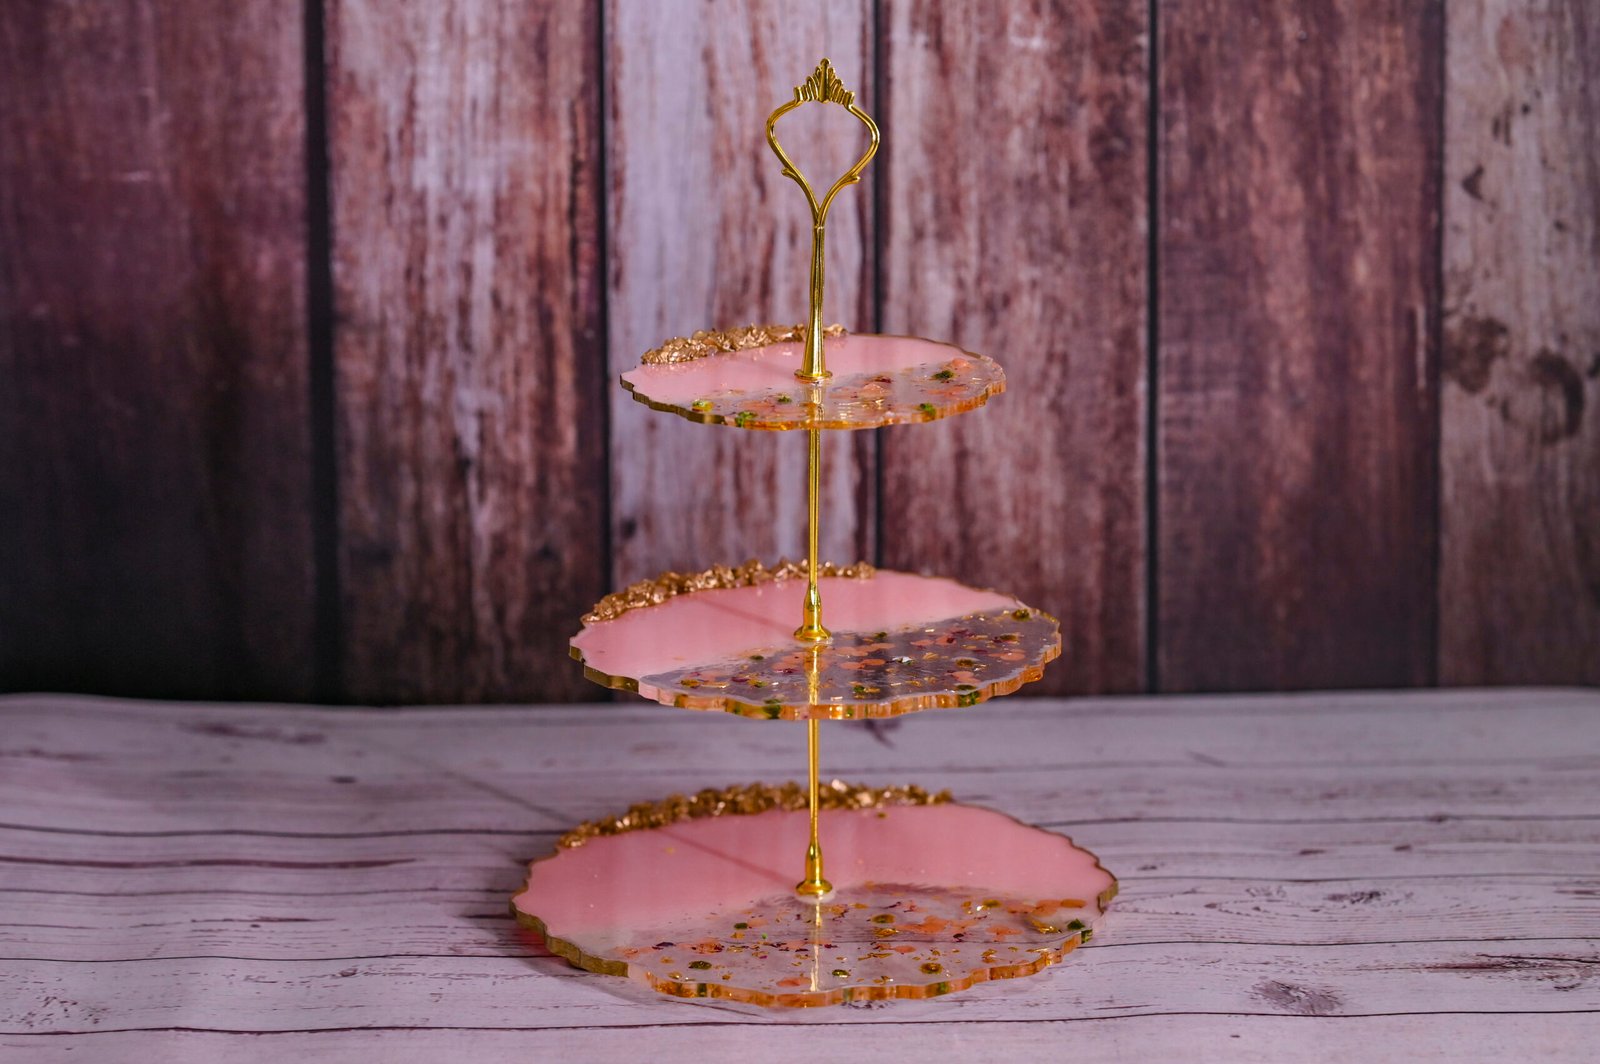 The Mushroom Clear Acrylic 3 Tier Cake Display Stand only £110.00